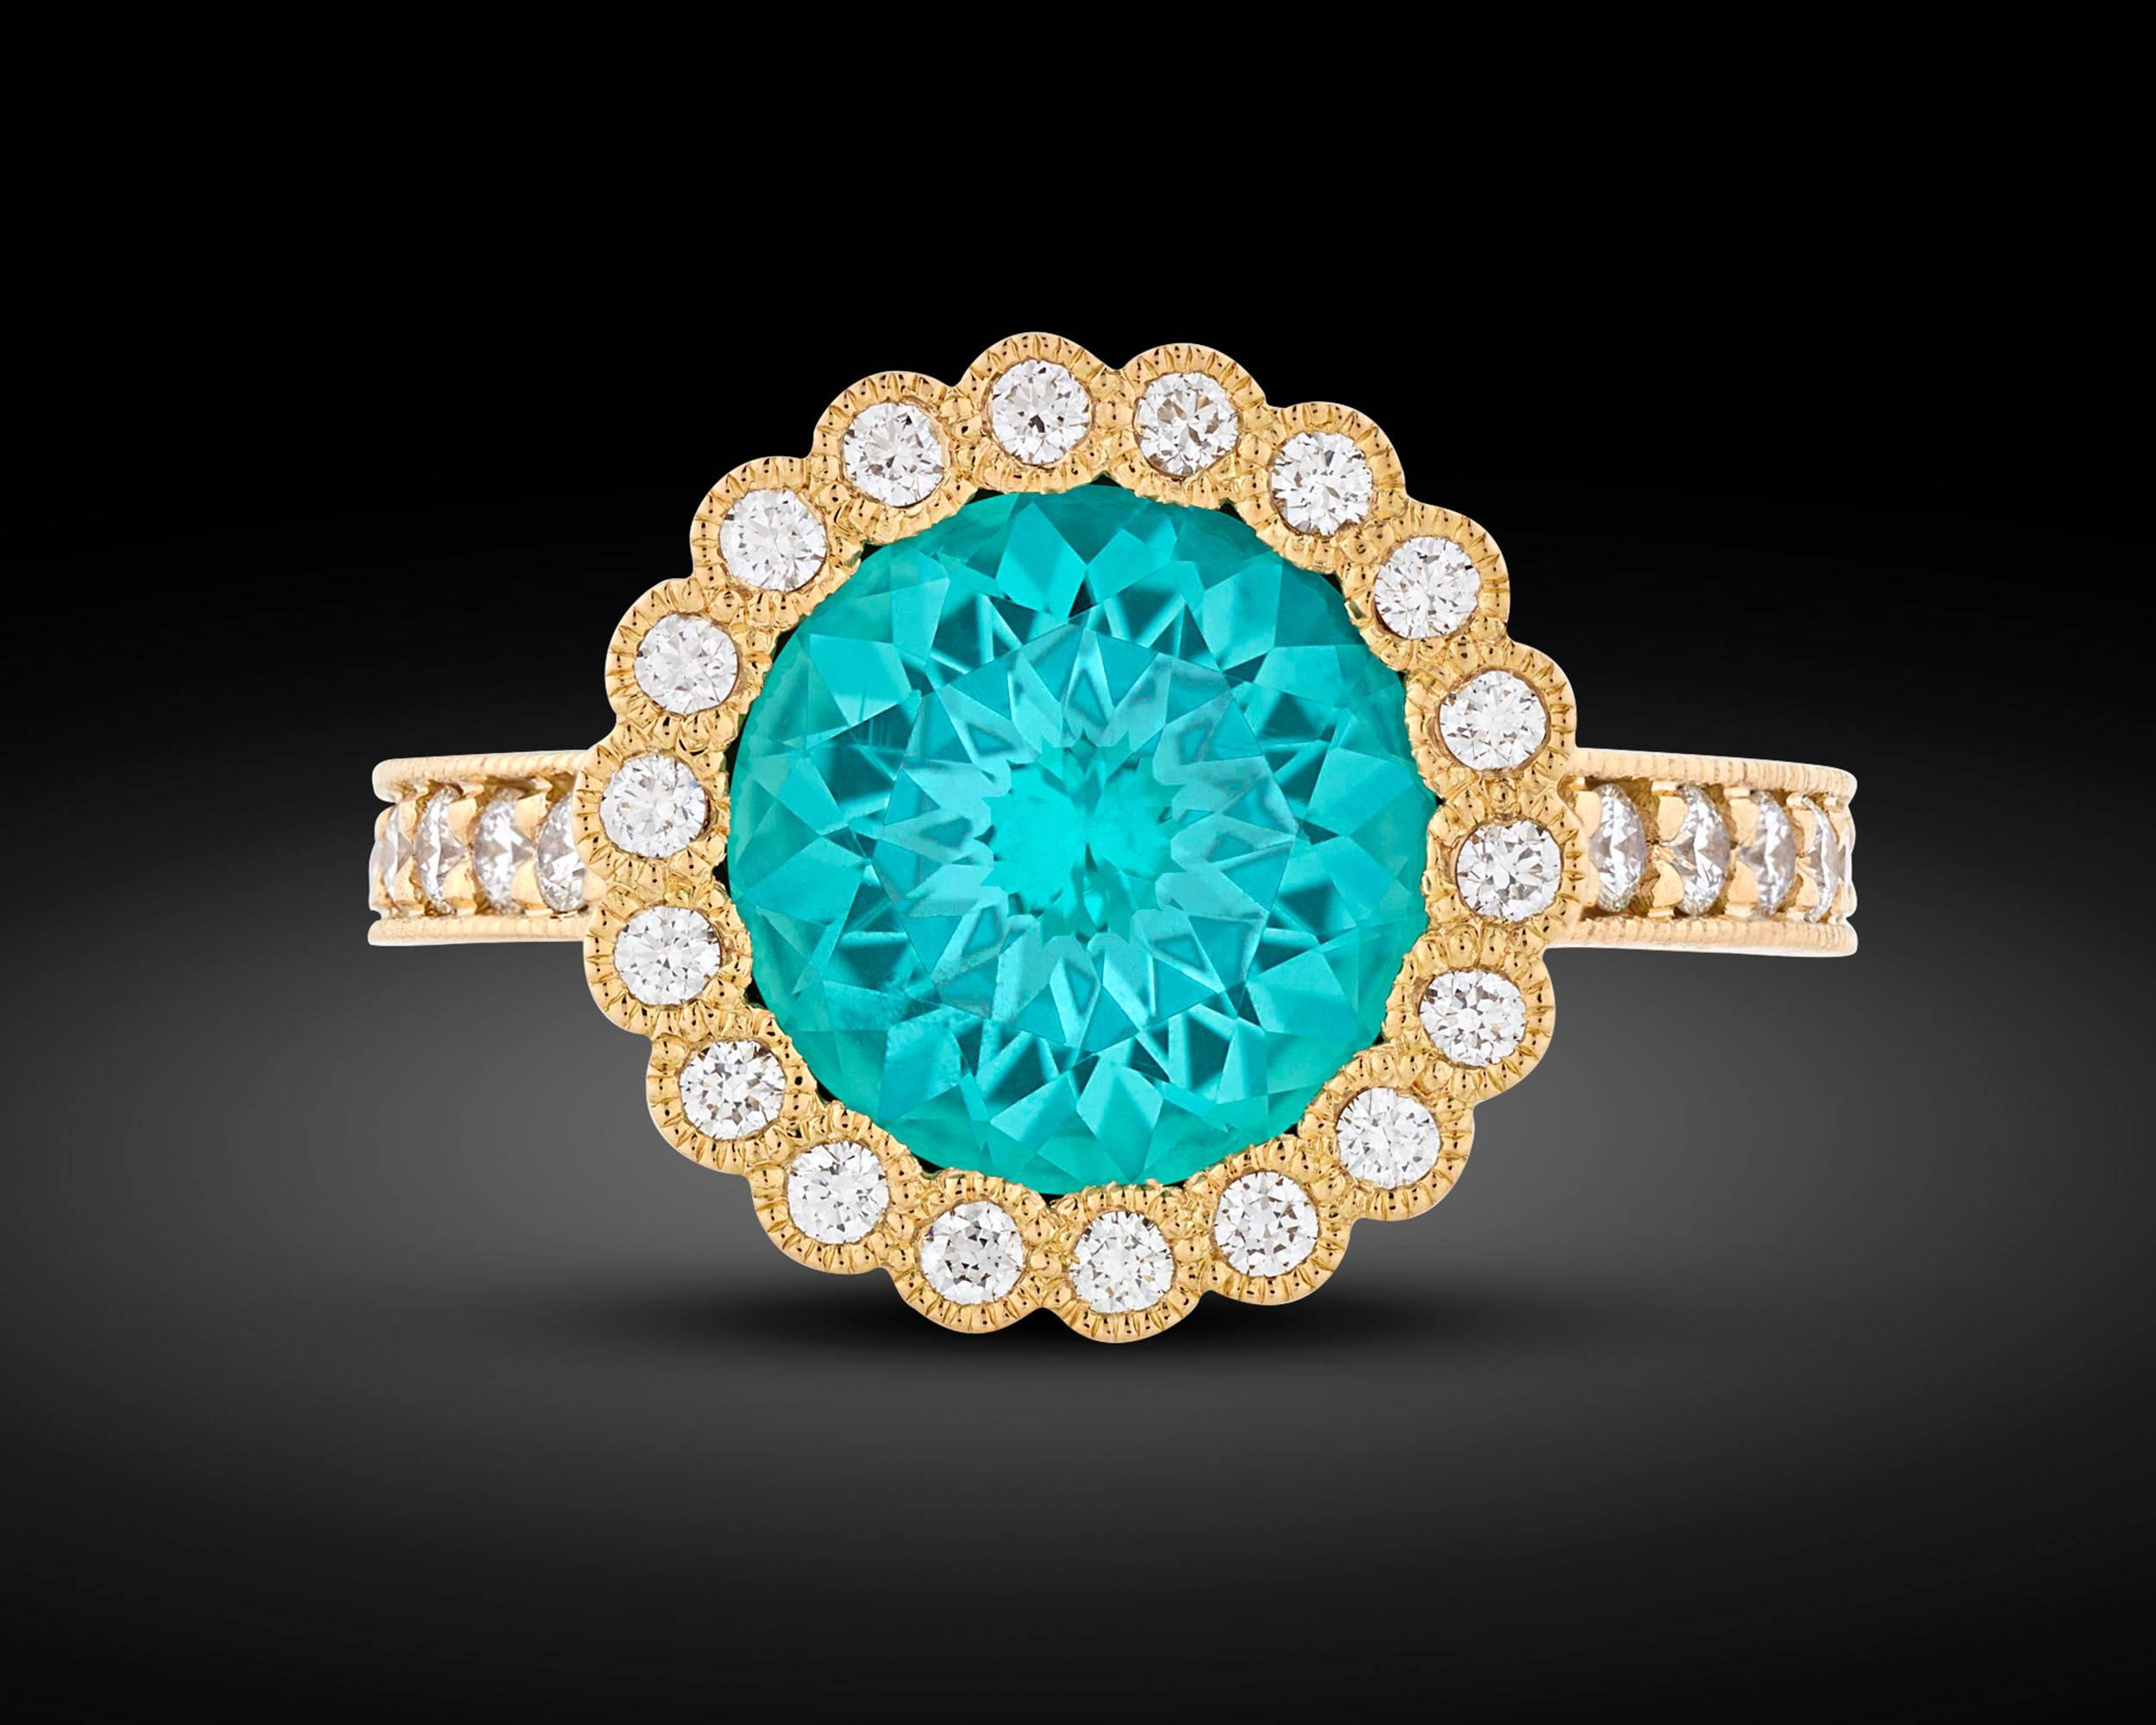 A dazzling 2.86-carat tourmaline is featured in this exquisite ring. Exhibiting a deep turquoise blue hue, the stunning gem is joined by approximately 0.51 carat of shimmering diamonds in its delicate 18k yellow gold setting.

Among the most